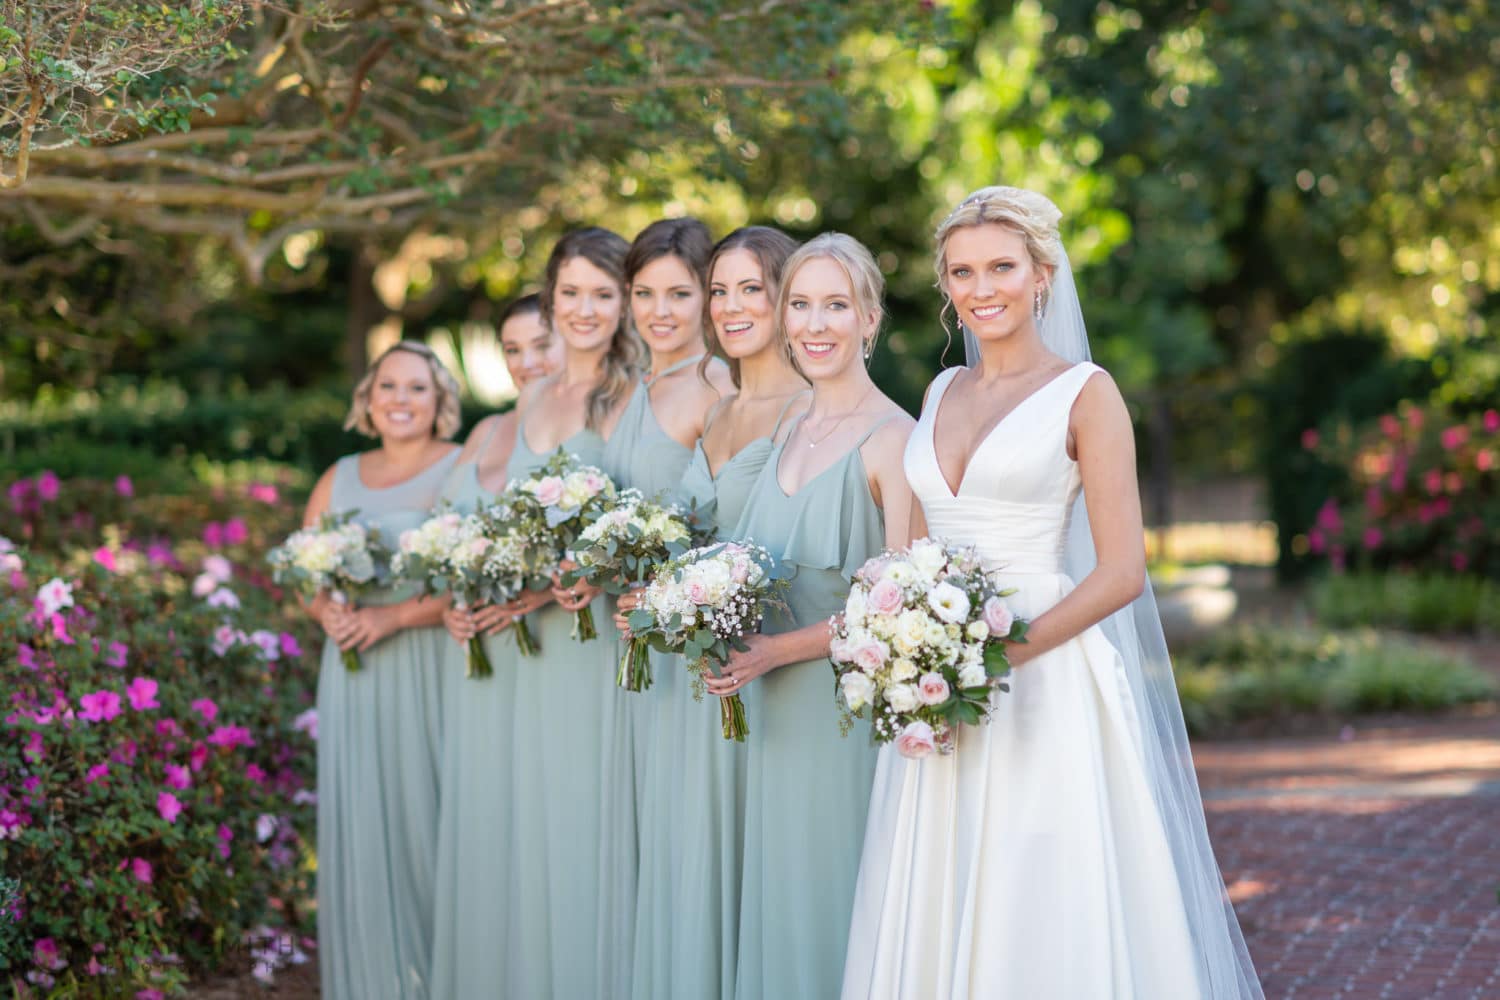 Fun poses with the bride and bridesmaids in the garden - Pine Lakes Country Club